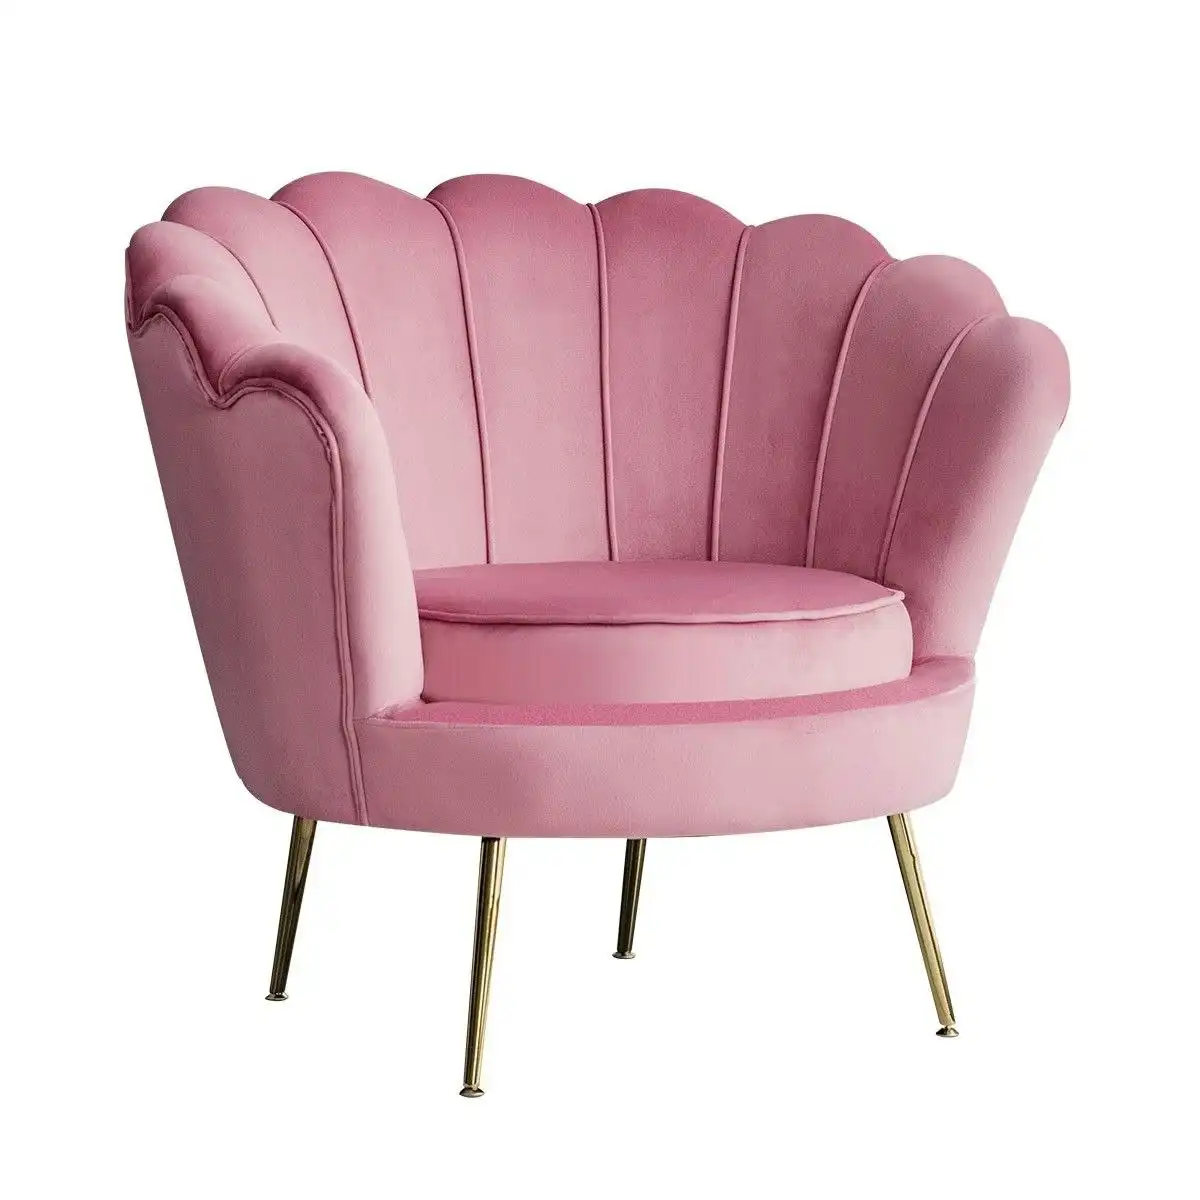 Ausway Upholstered Velvet Accent Armchair Lounge Chair Soft Single Sofa Dining Chair Pink